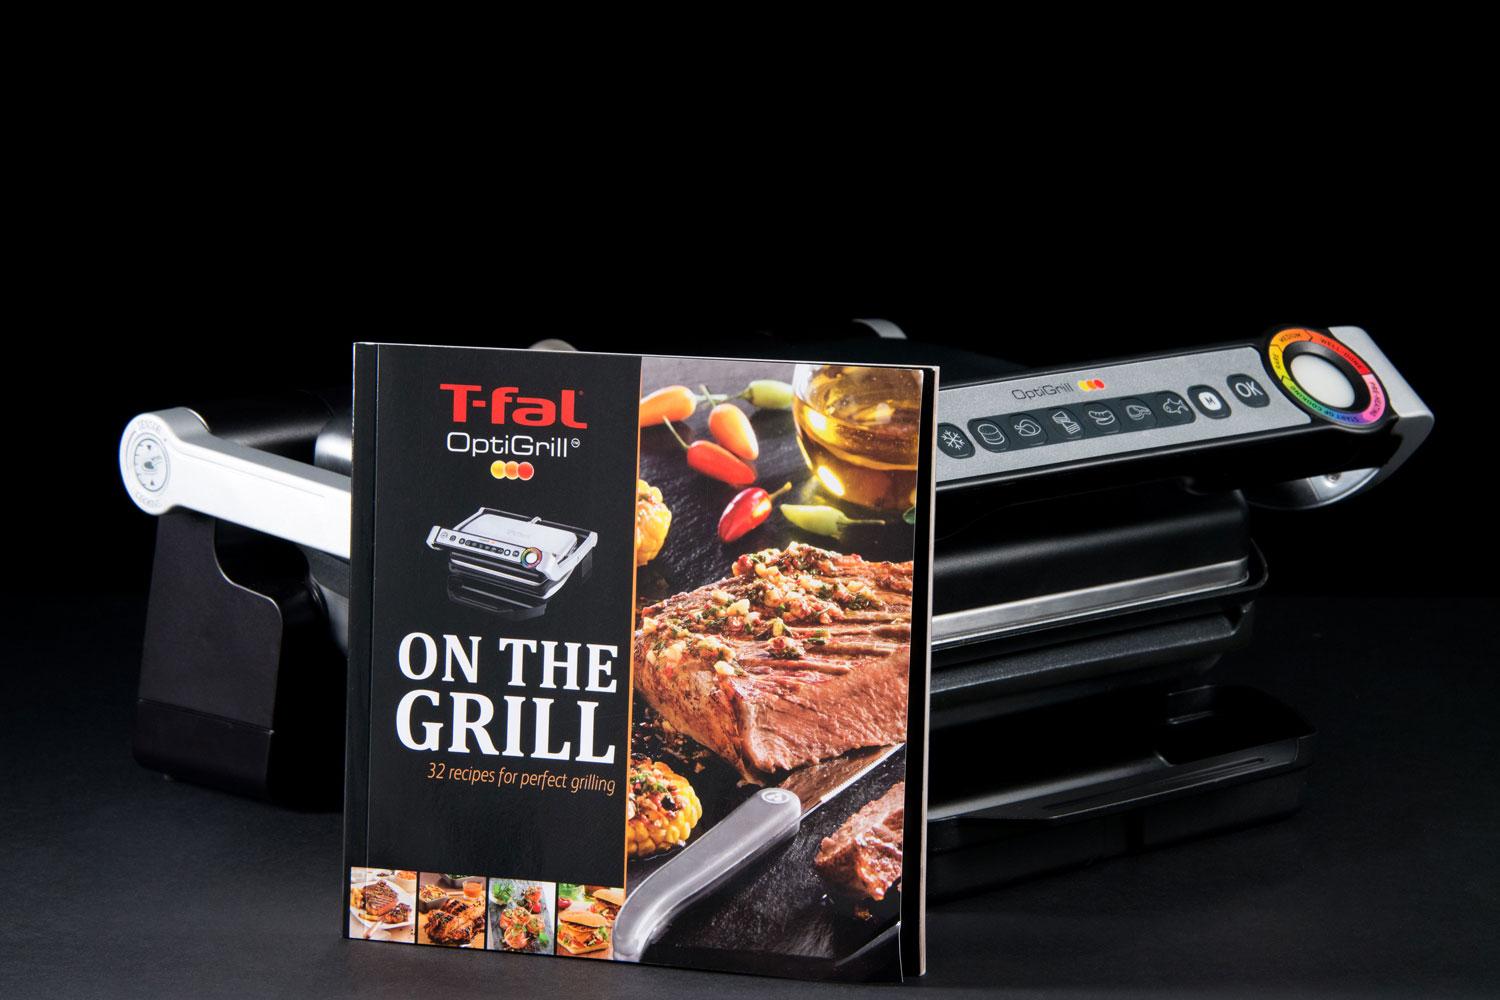 T-fal OptiGrill Review: Smart Appliance Knows When Food Is Done